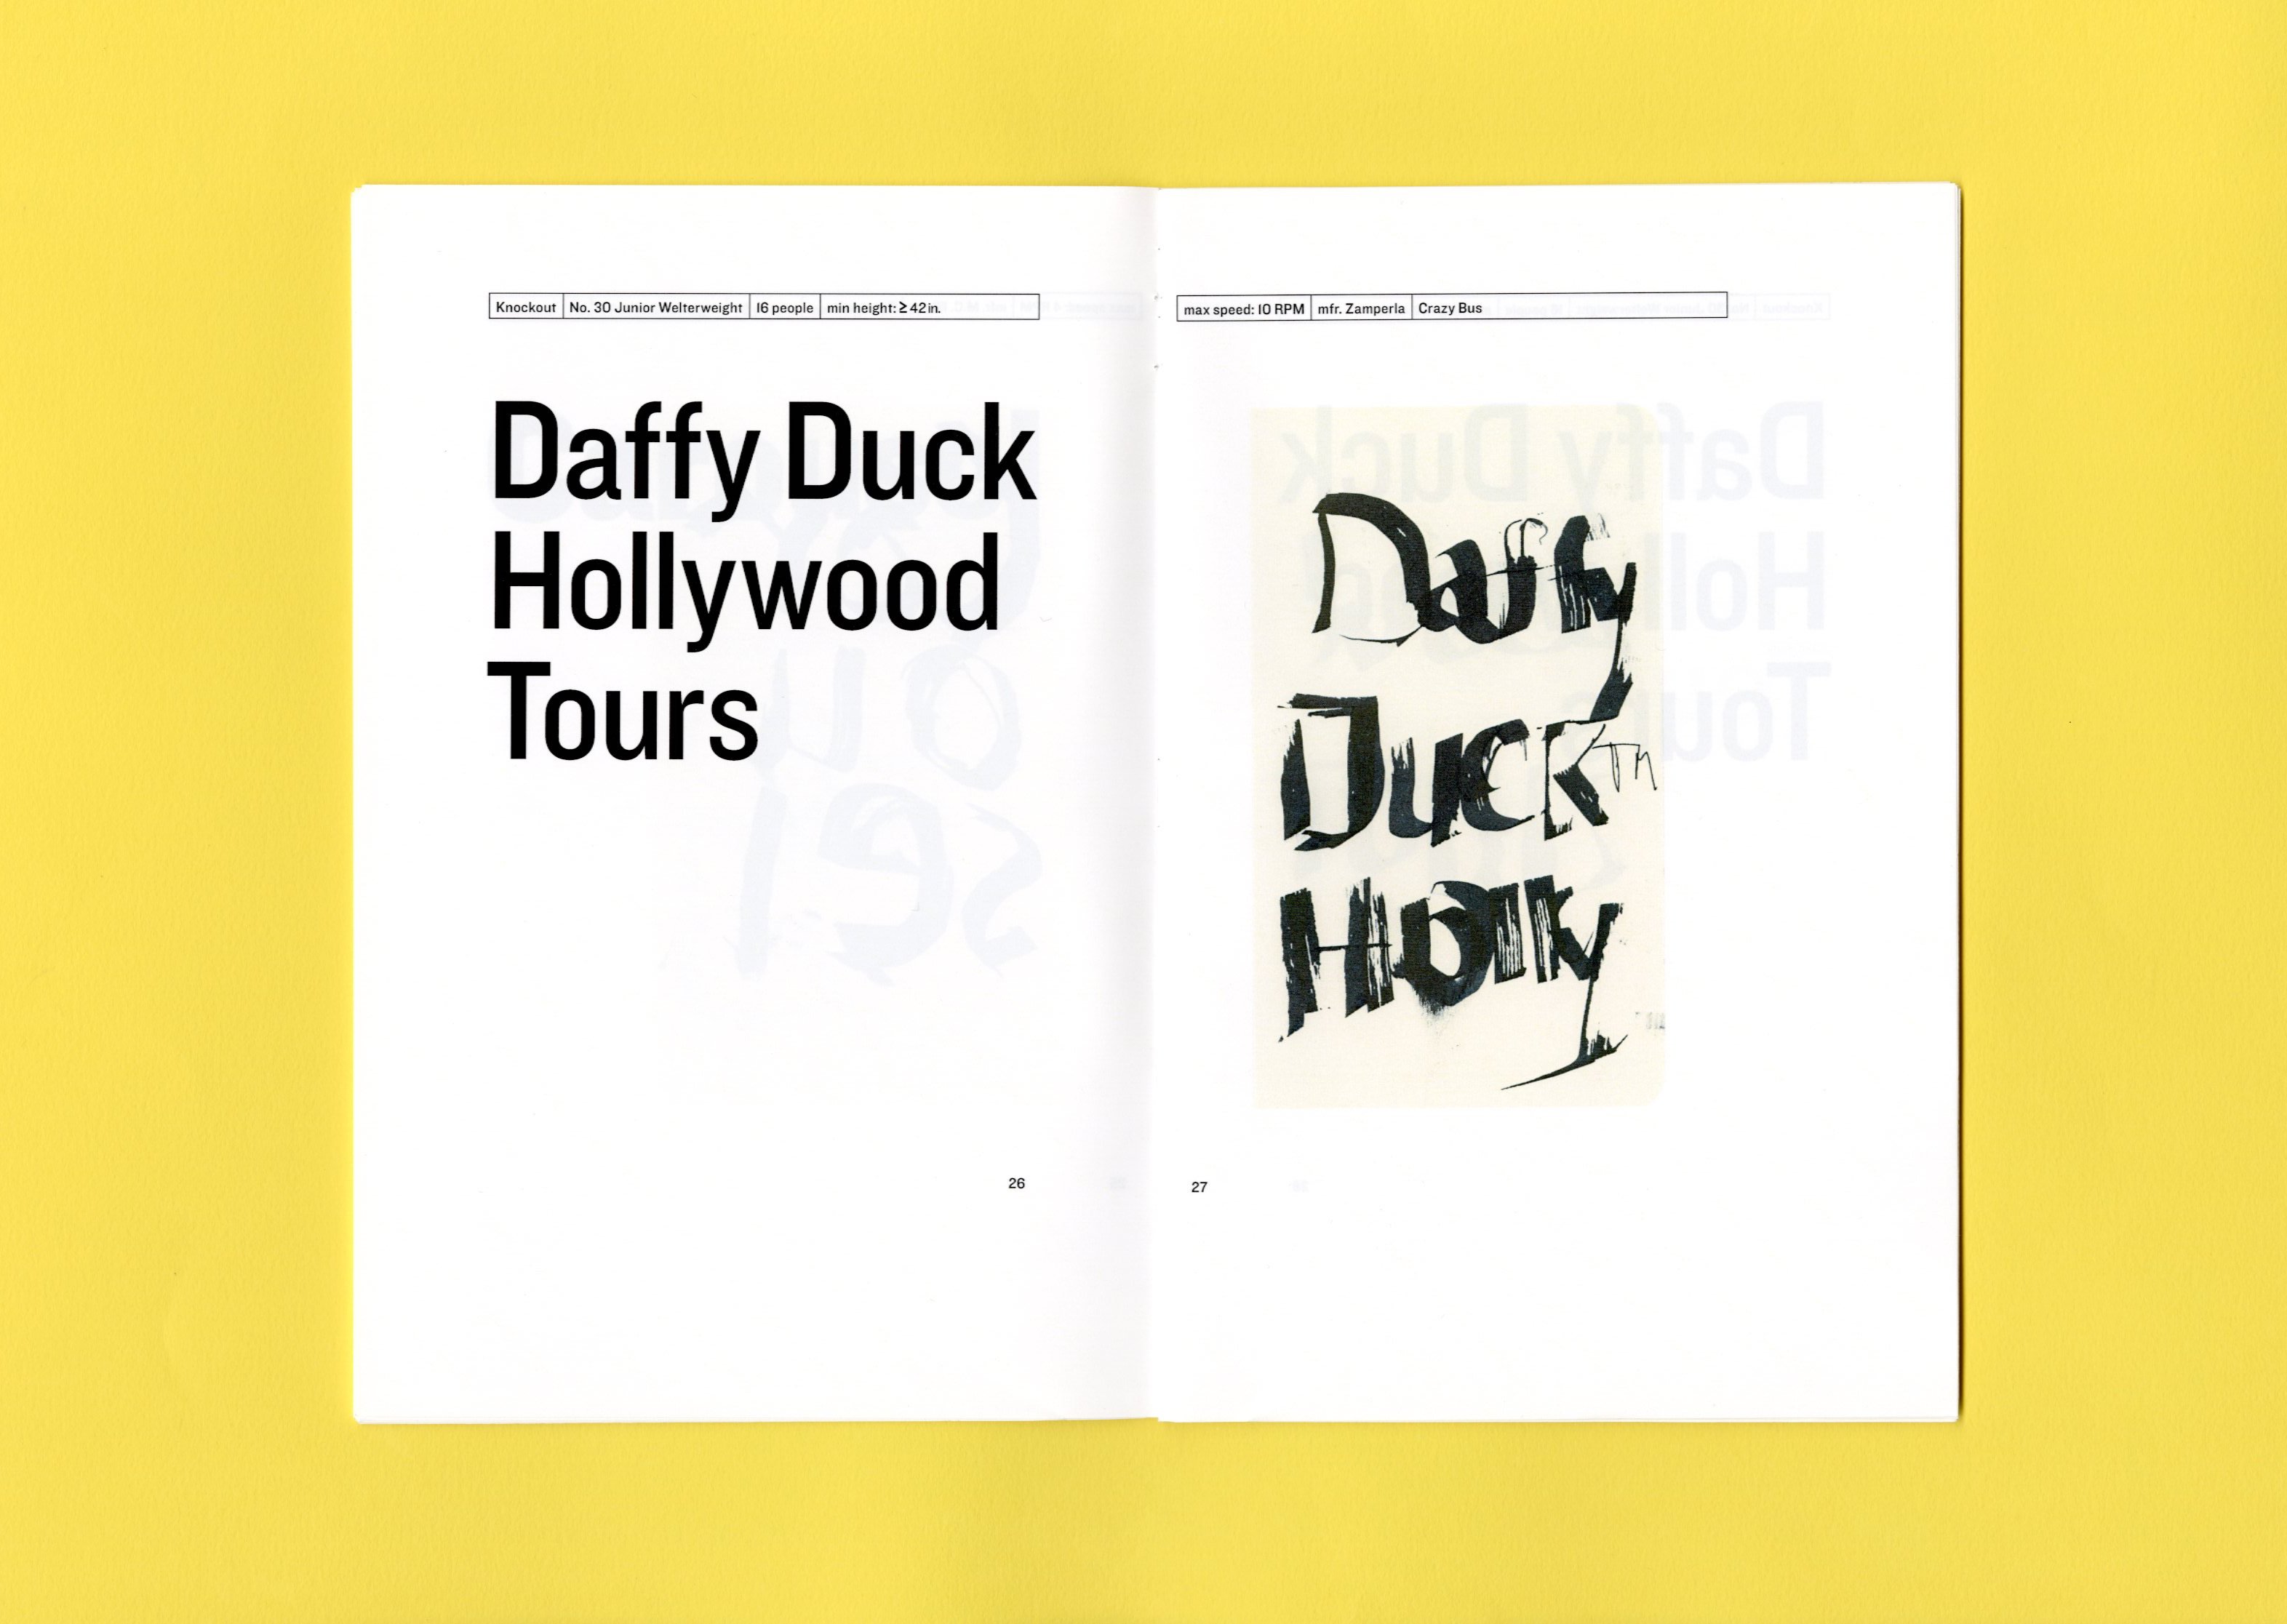 Daffy Duck Hollywood Tours